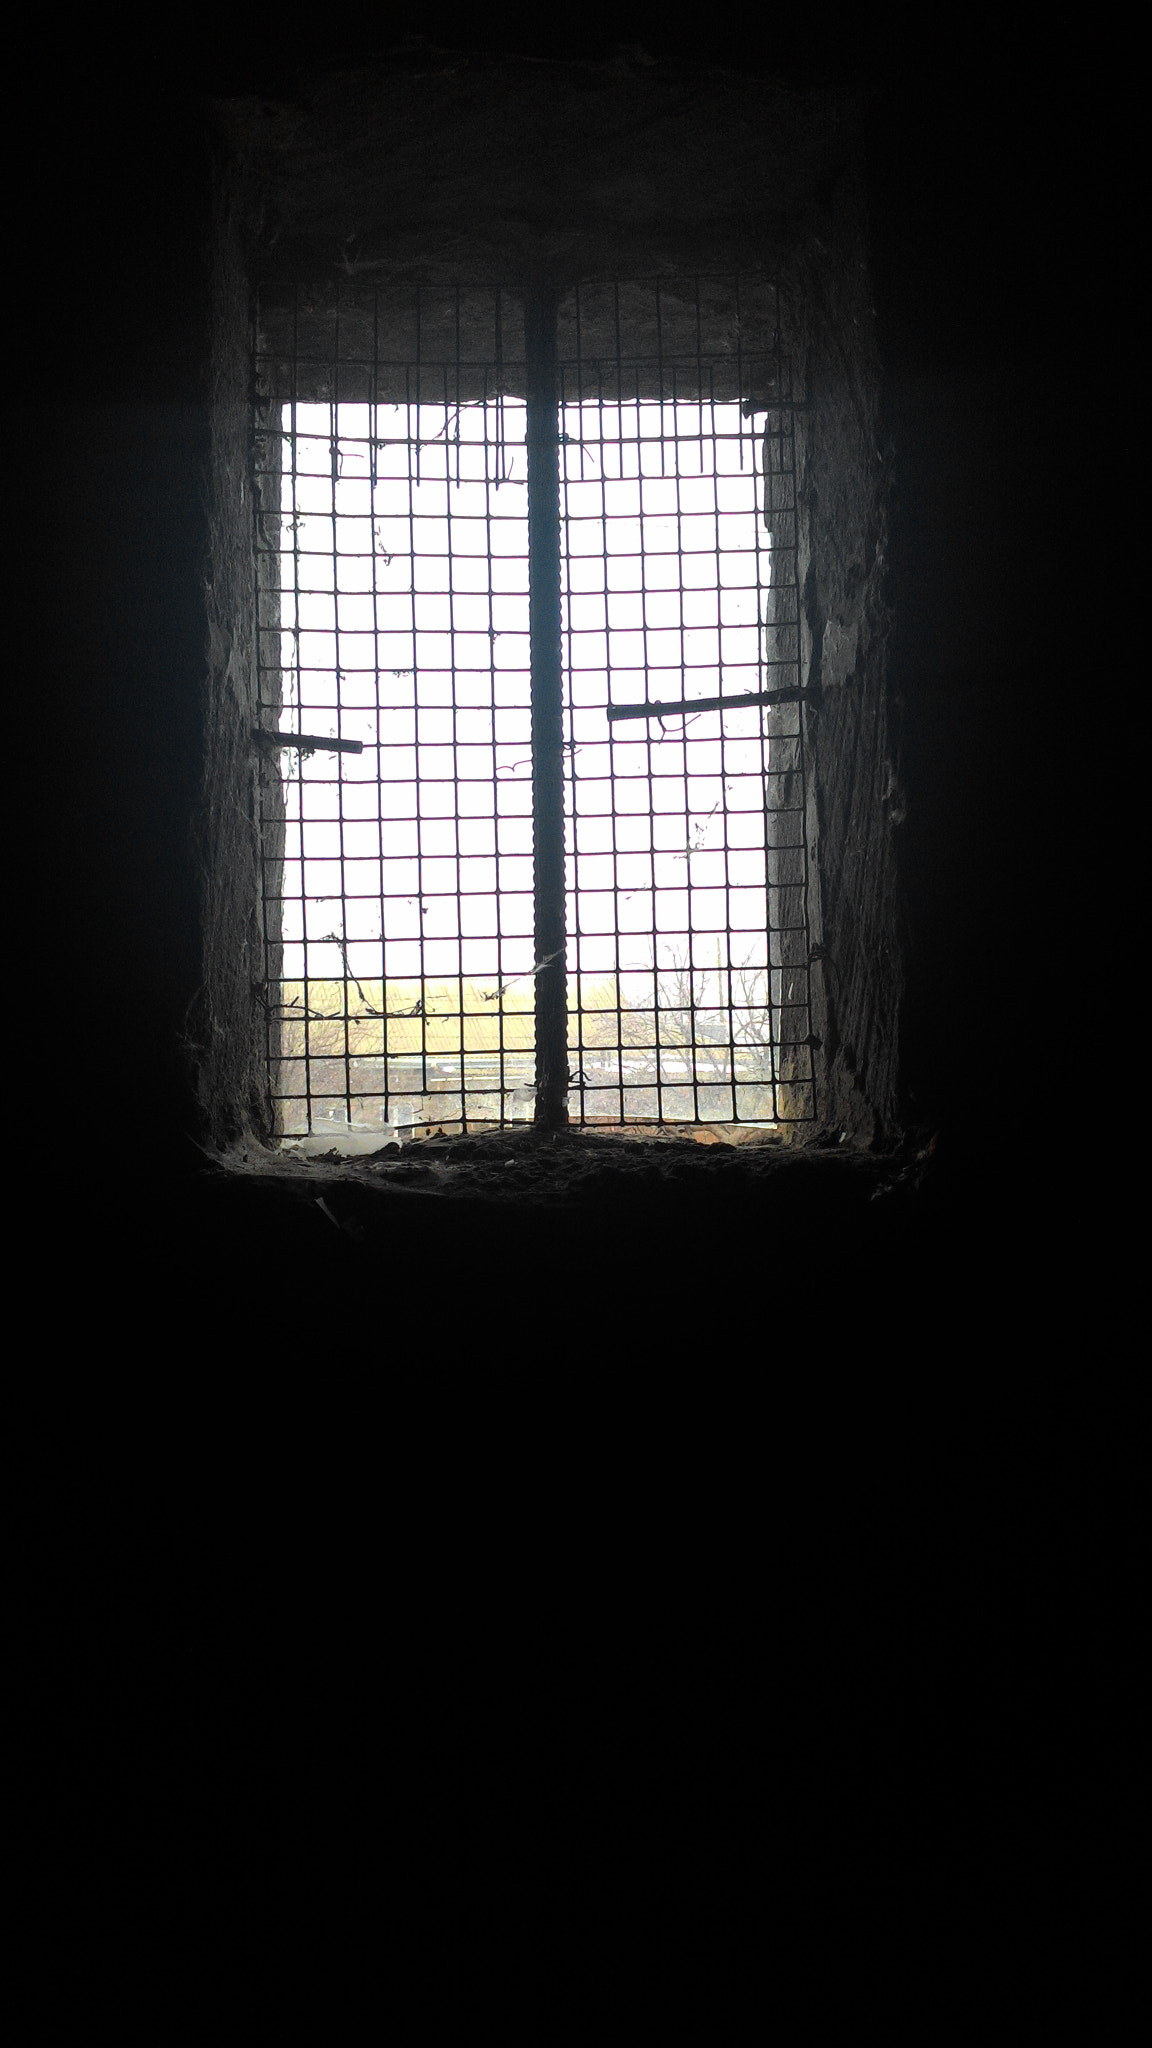 ASUS Z002 sample photo. A rather old window on a cloudy, damp day~ photography